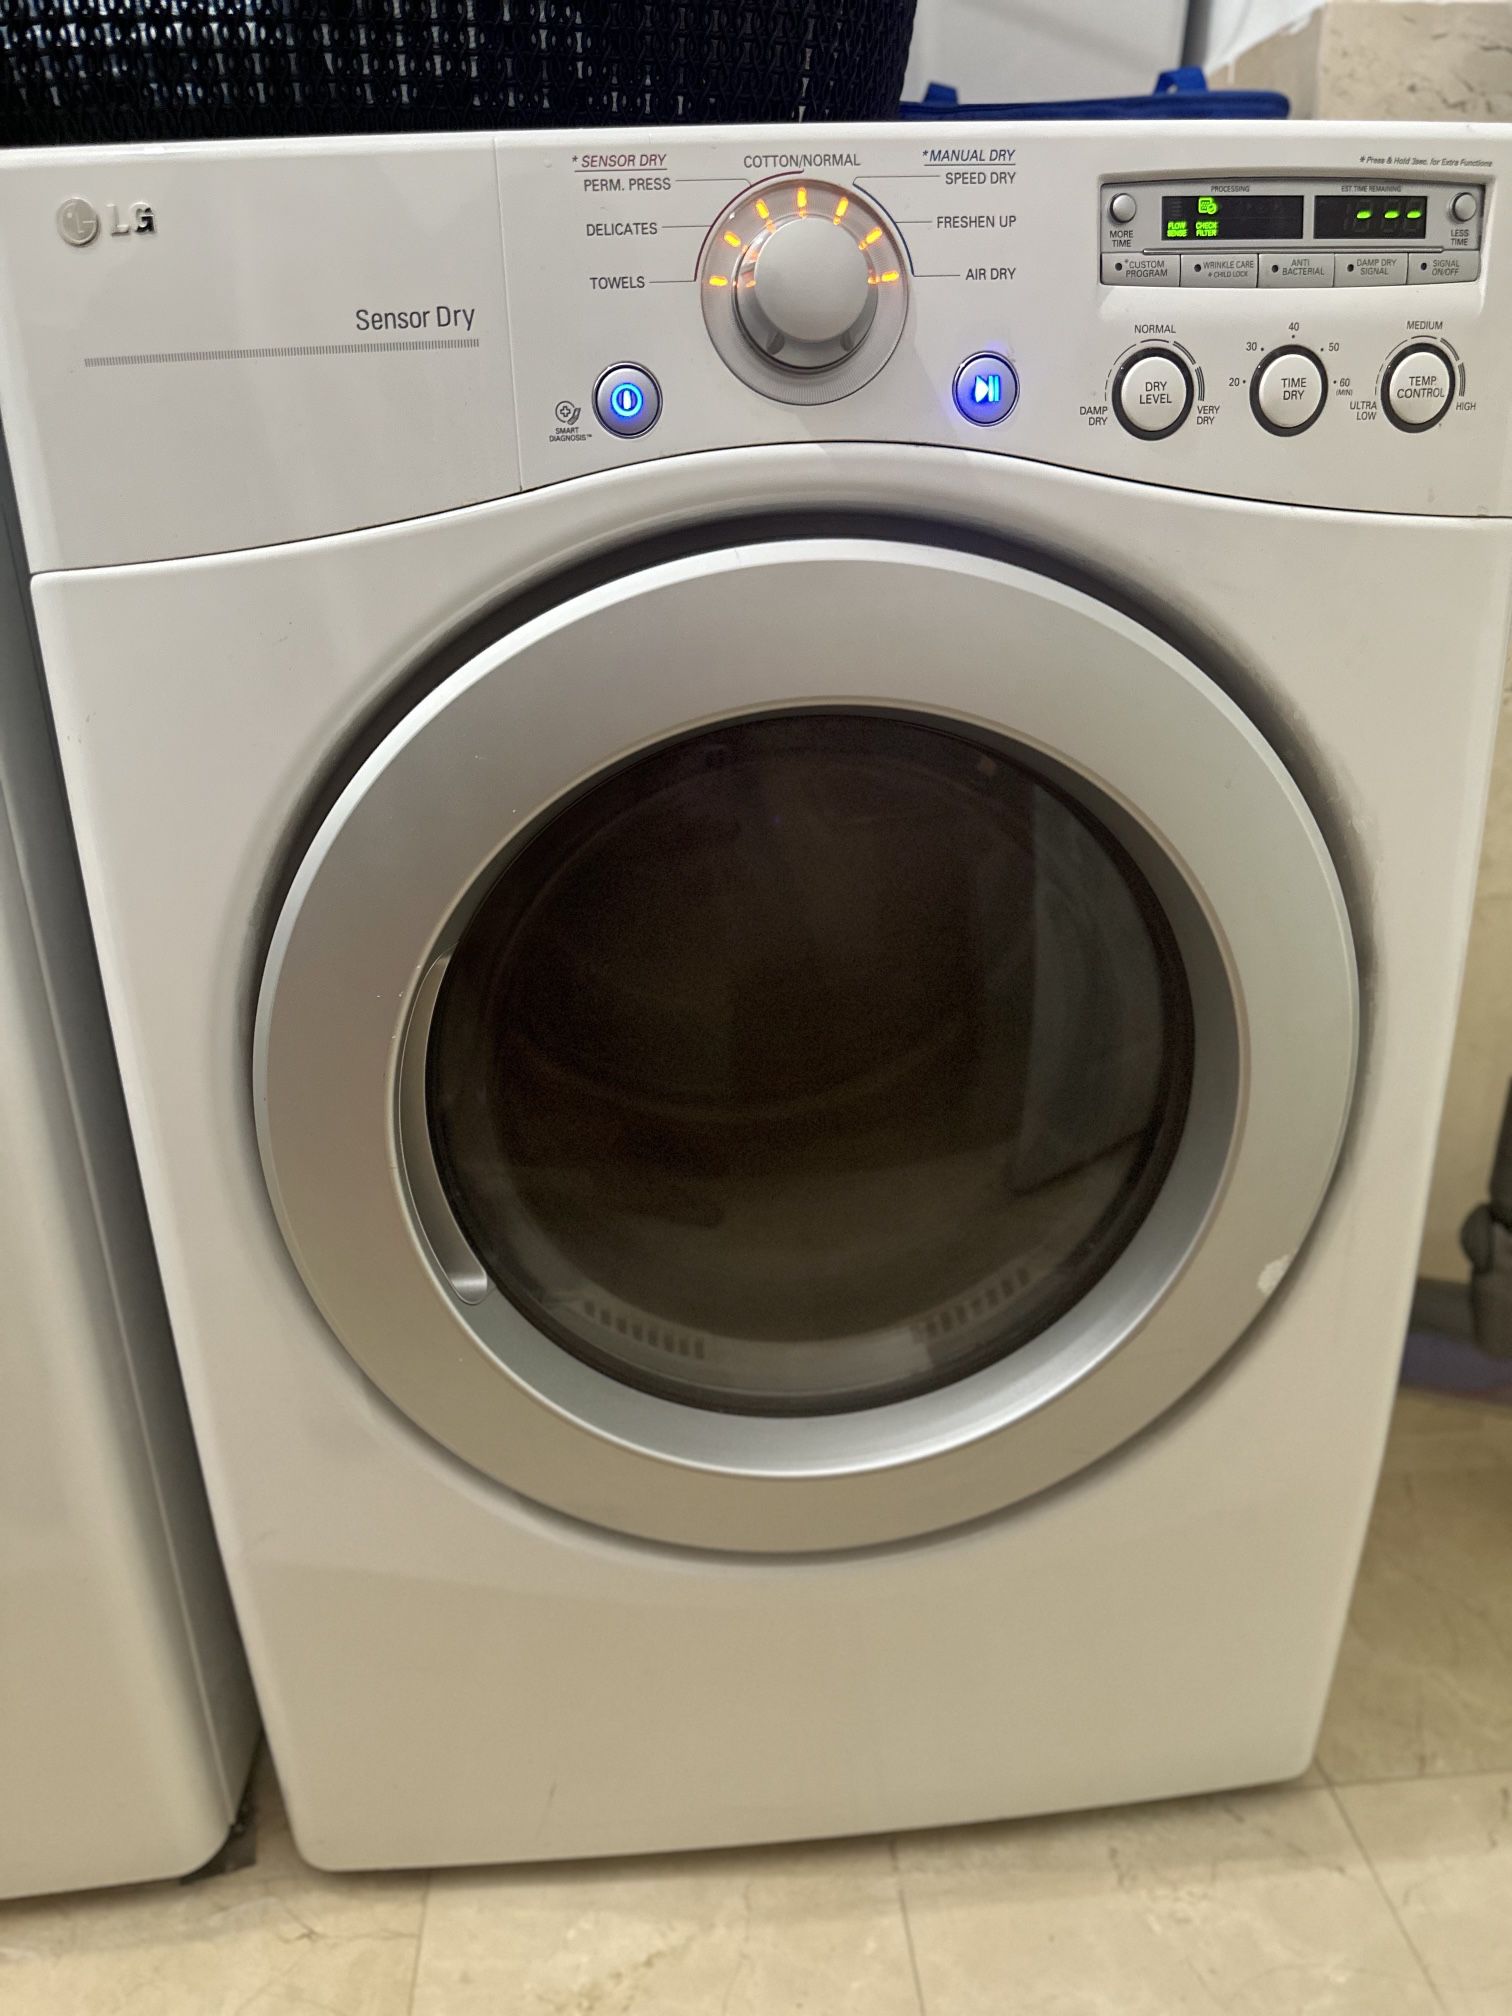 LG washer drier / dryer combo almost new